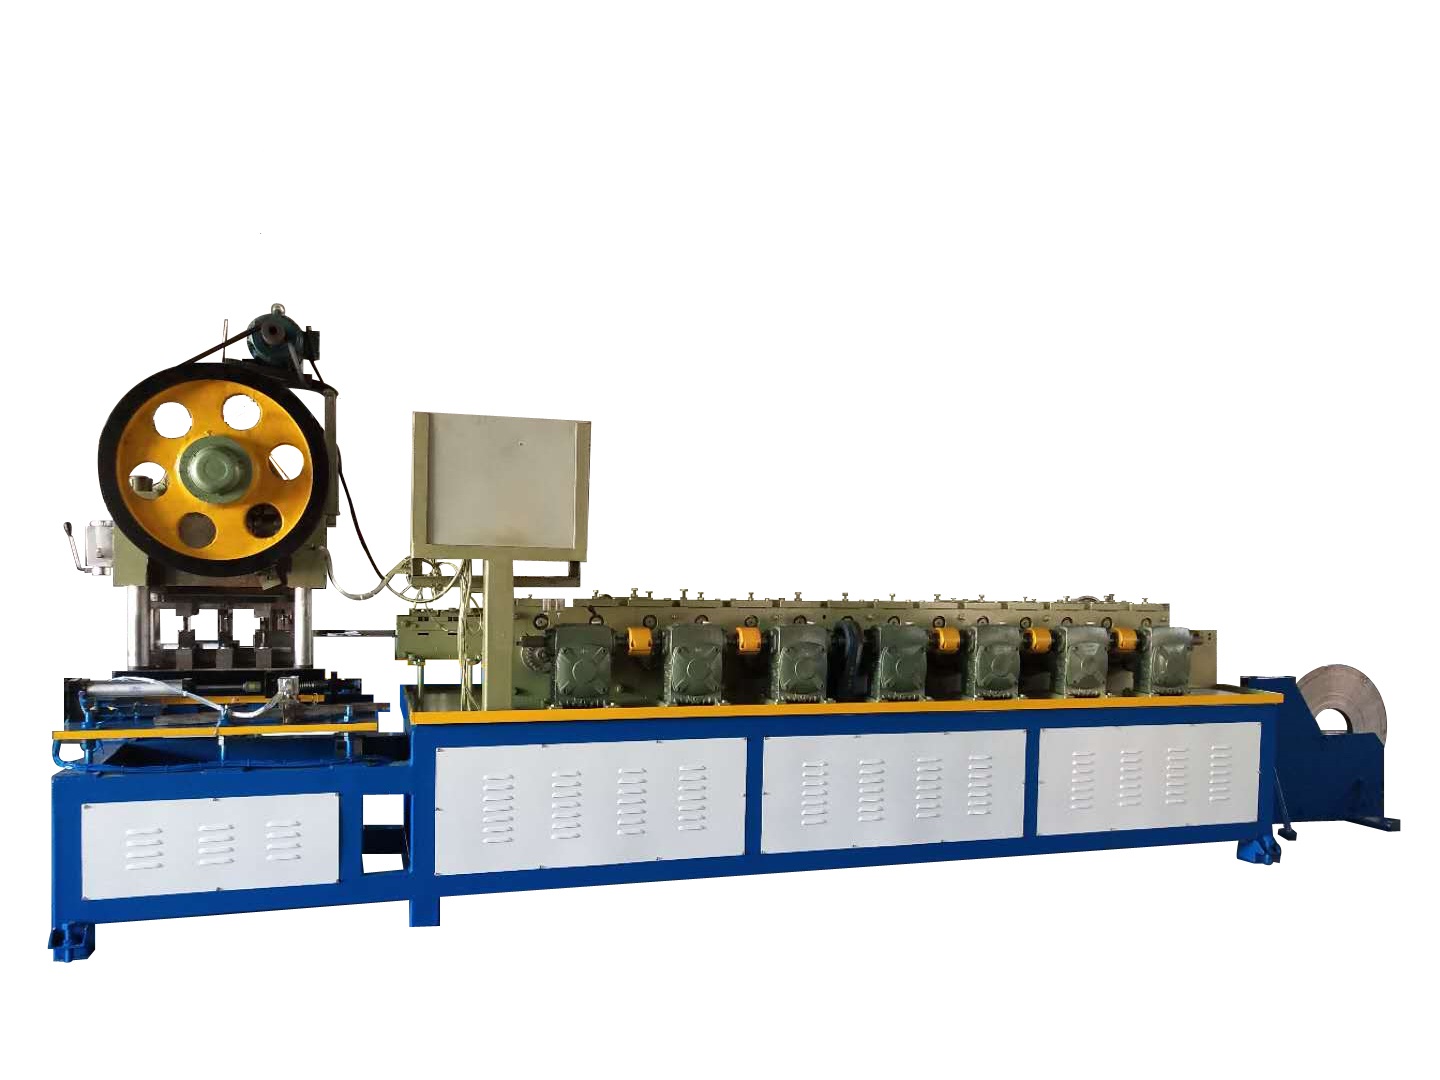 Worm wheel forming machine for drawer runners